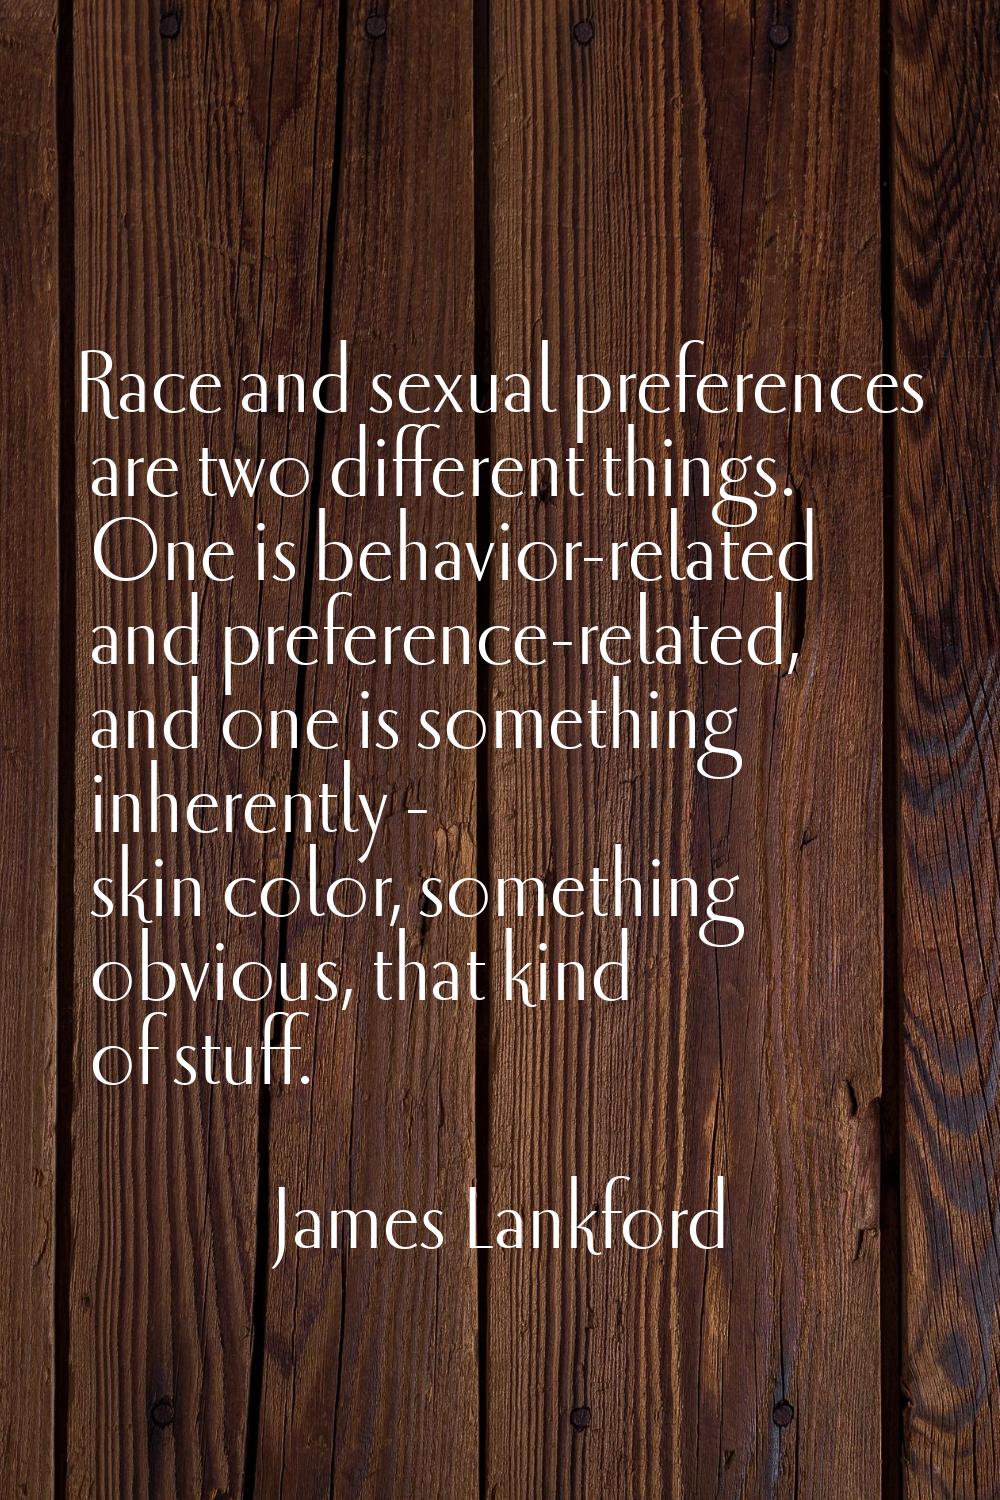 Race and sexual preferences are two different things. One is behavior-related and preference-relate